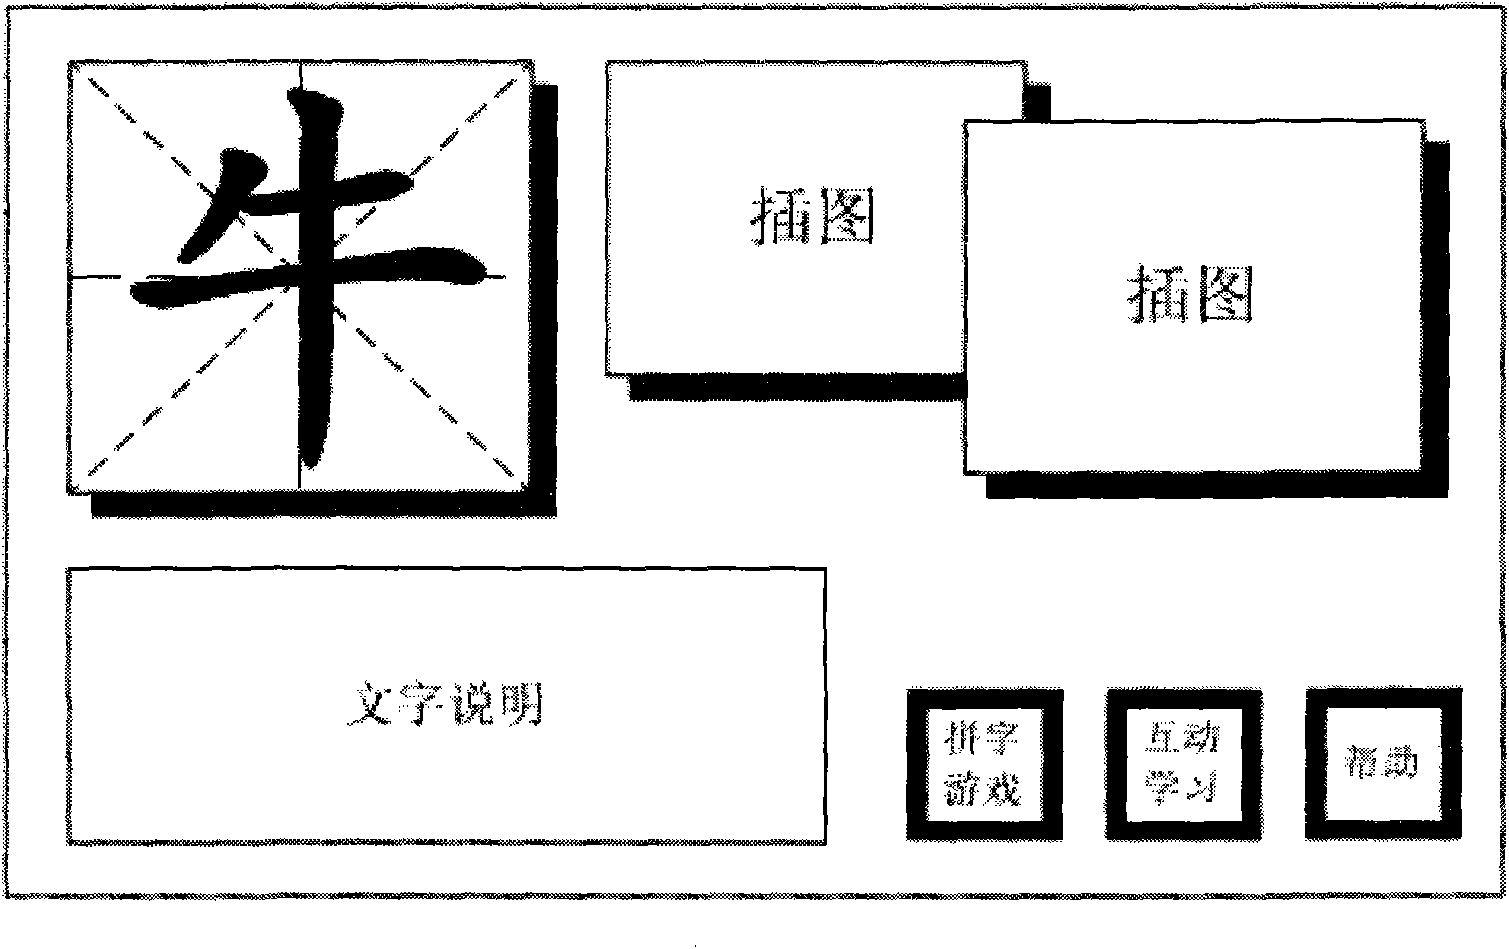 Method for learning Chinese by combining reality enhancing technique and plane reading material